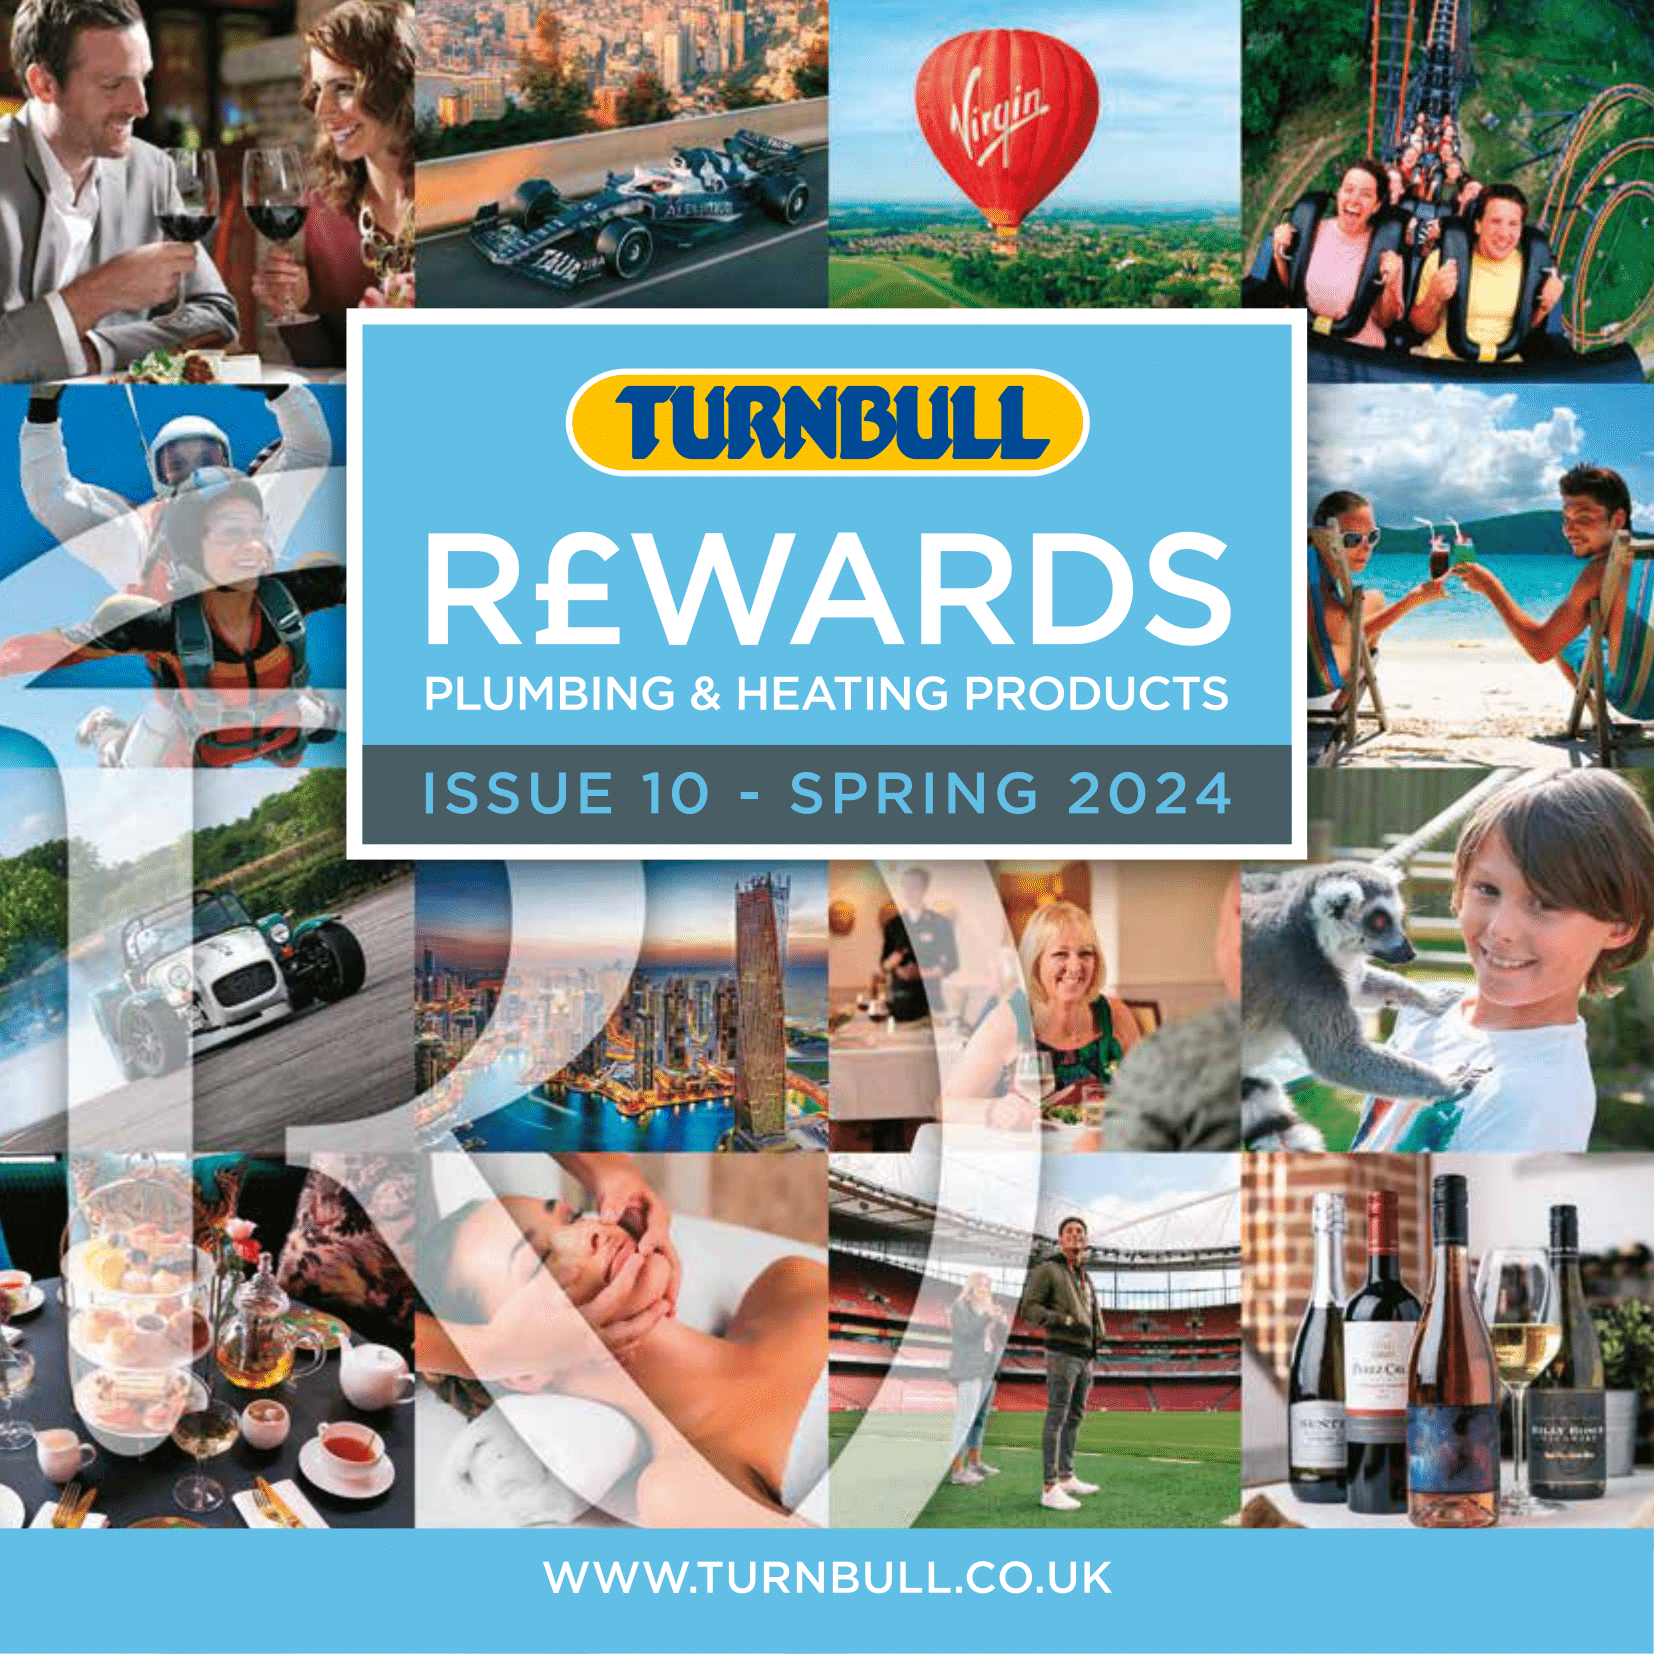 Turnbull Plumbing and Heating Rewards Page